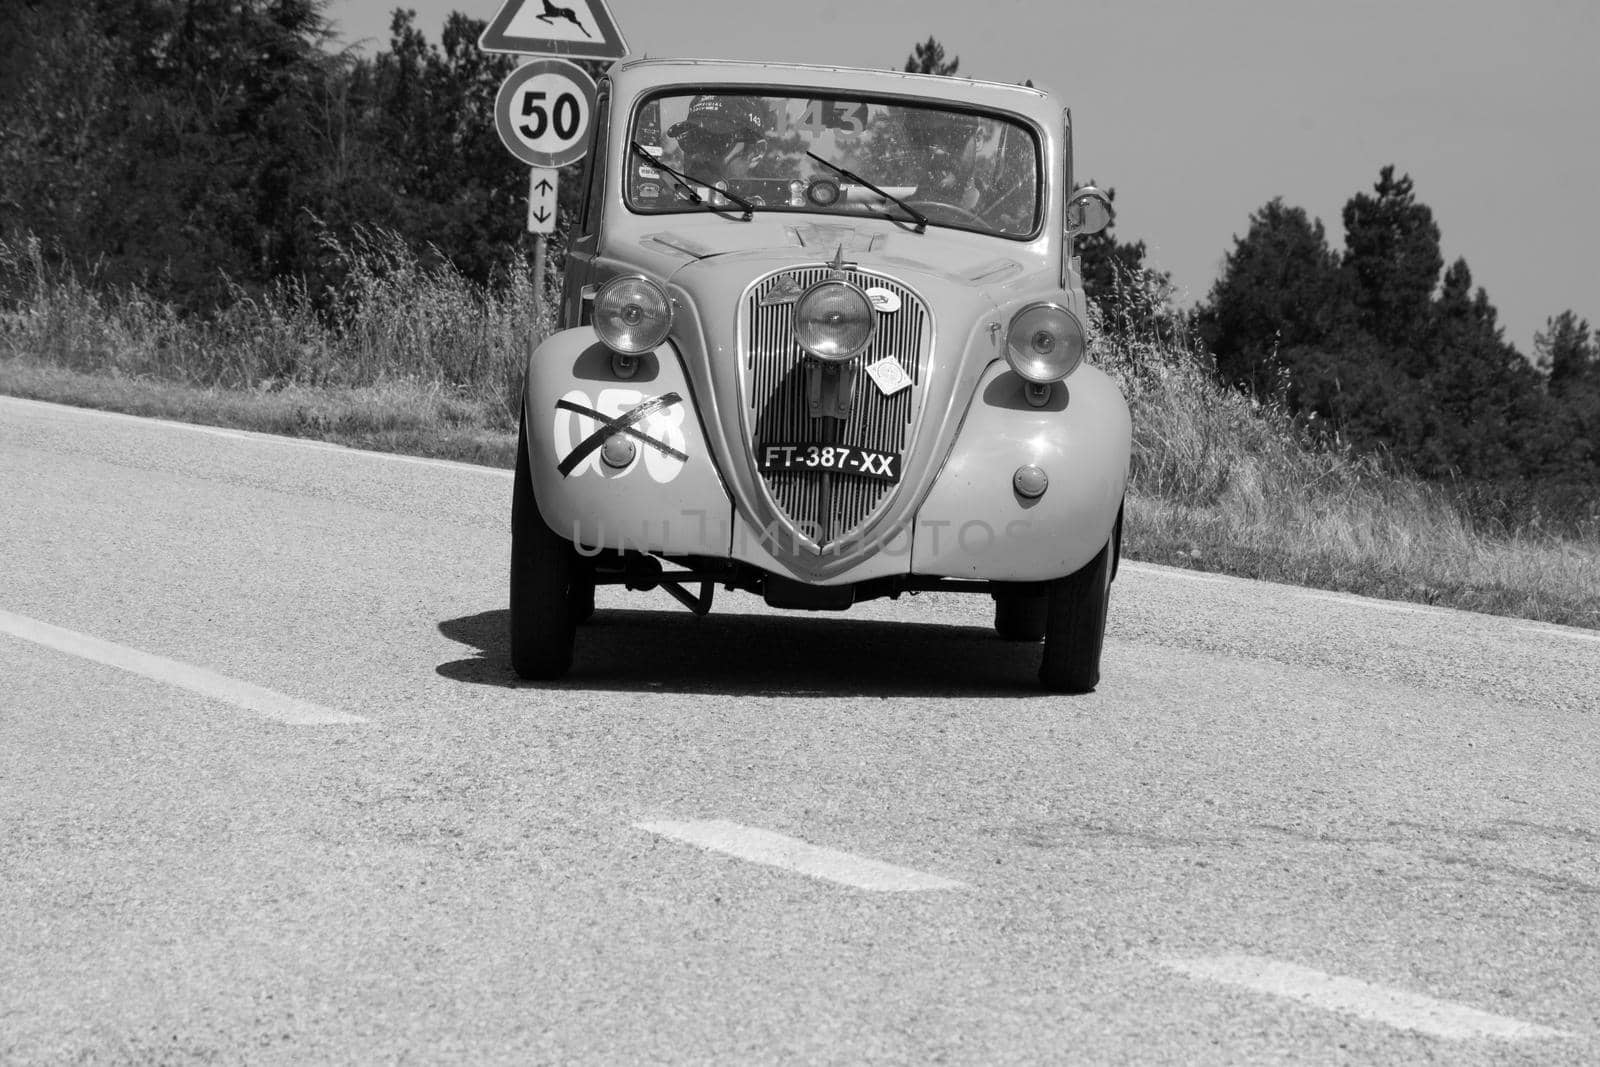 FIAT 500 B TOPOLINO 1948 on an old racing car in rally Mille Miglia 2022 the famous italian historical race (1927-1957 by massimocampanari